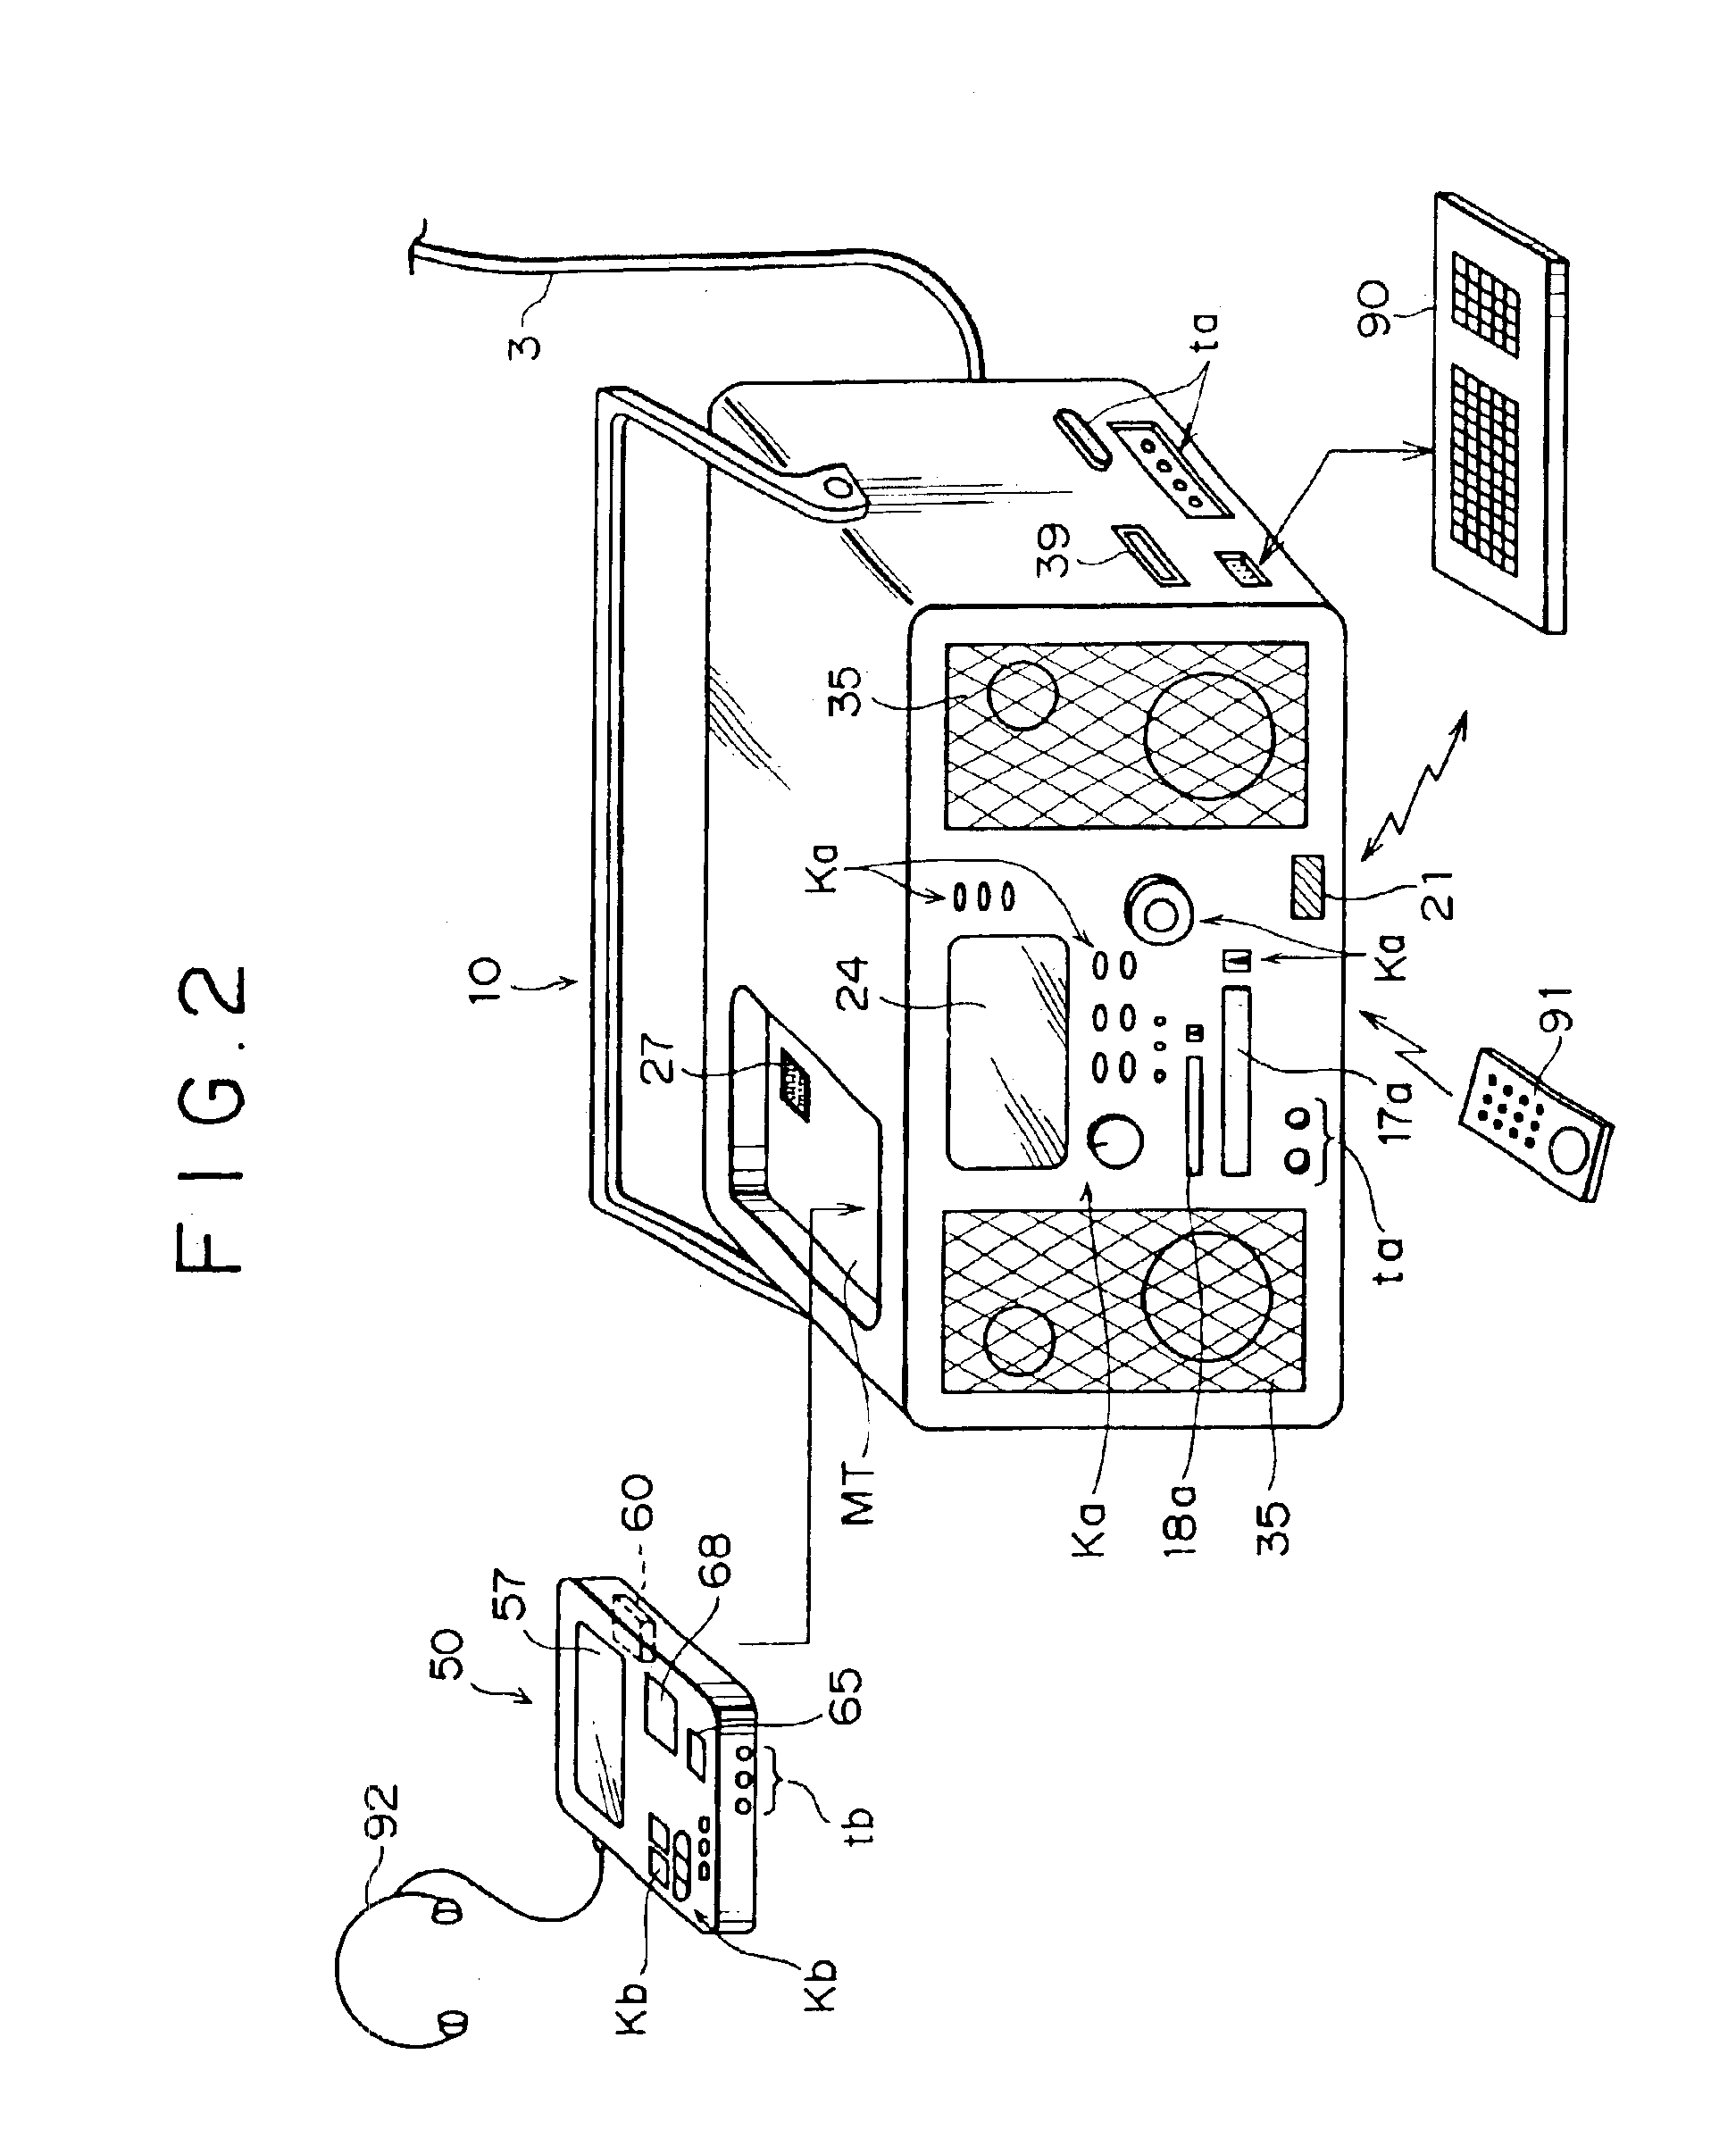 Recording and/or reproducing apparatus, portable recording and reproducing apparatus, data transfer system, data transfer method, and data recording and reproducing method